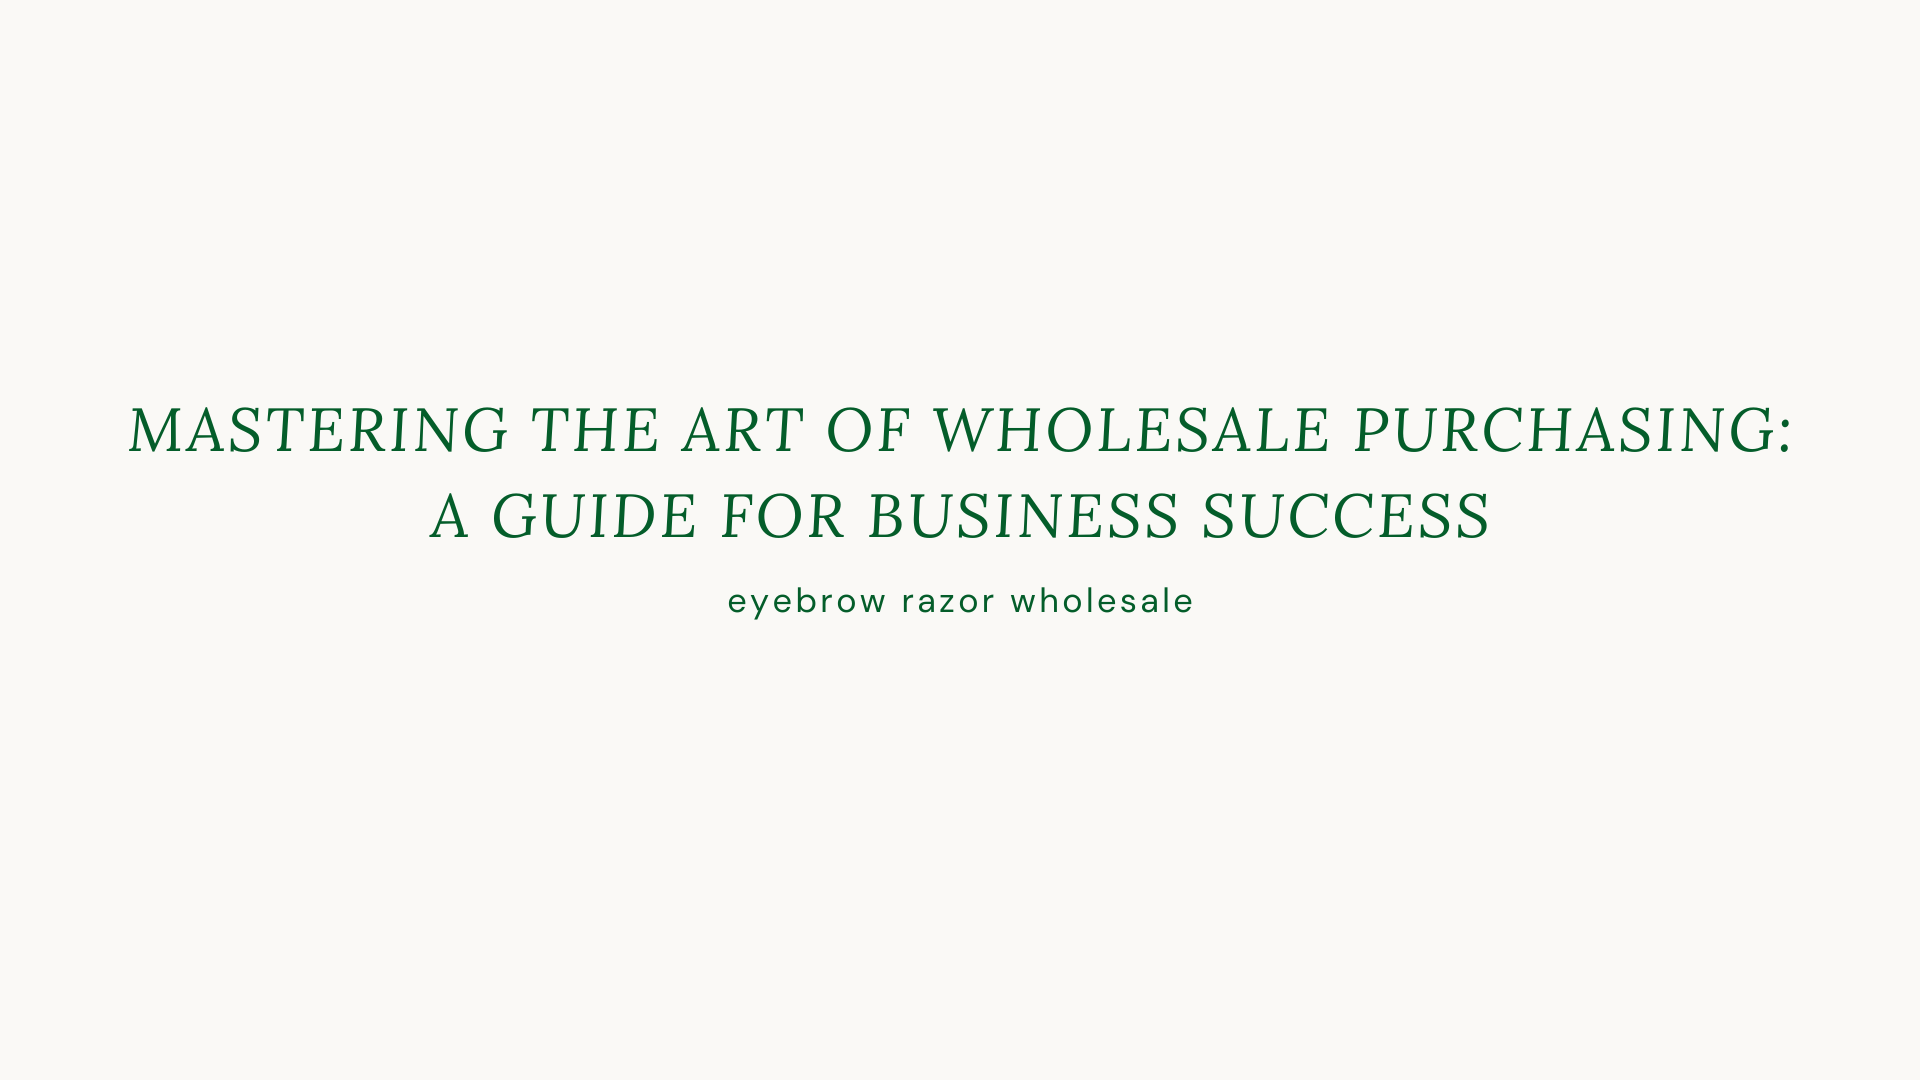 Mastering the Art of Wholesale Purchasing: A Guide for Business Success